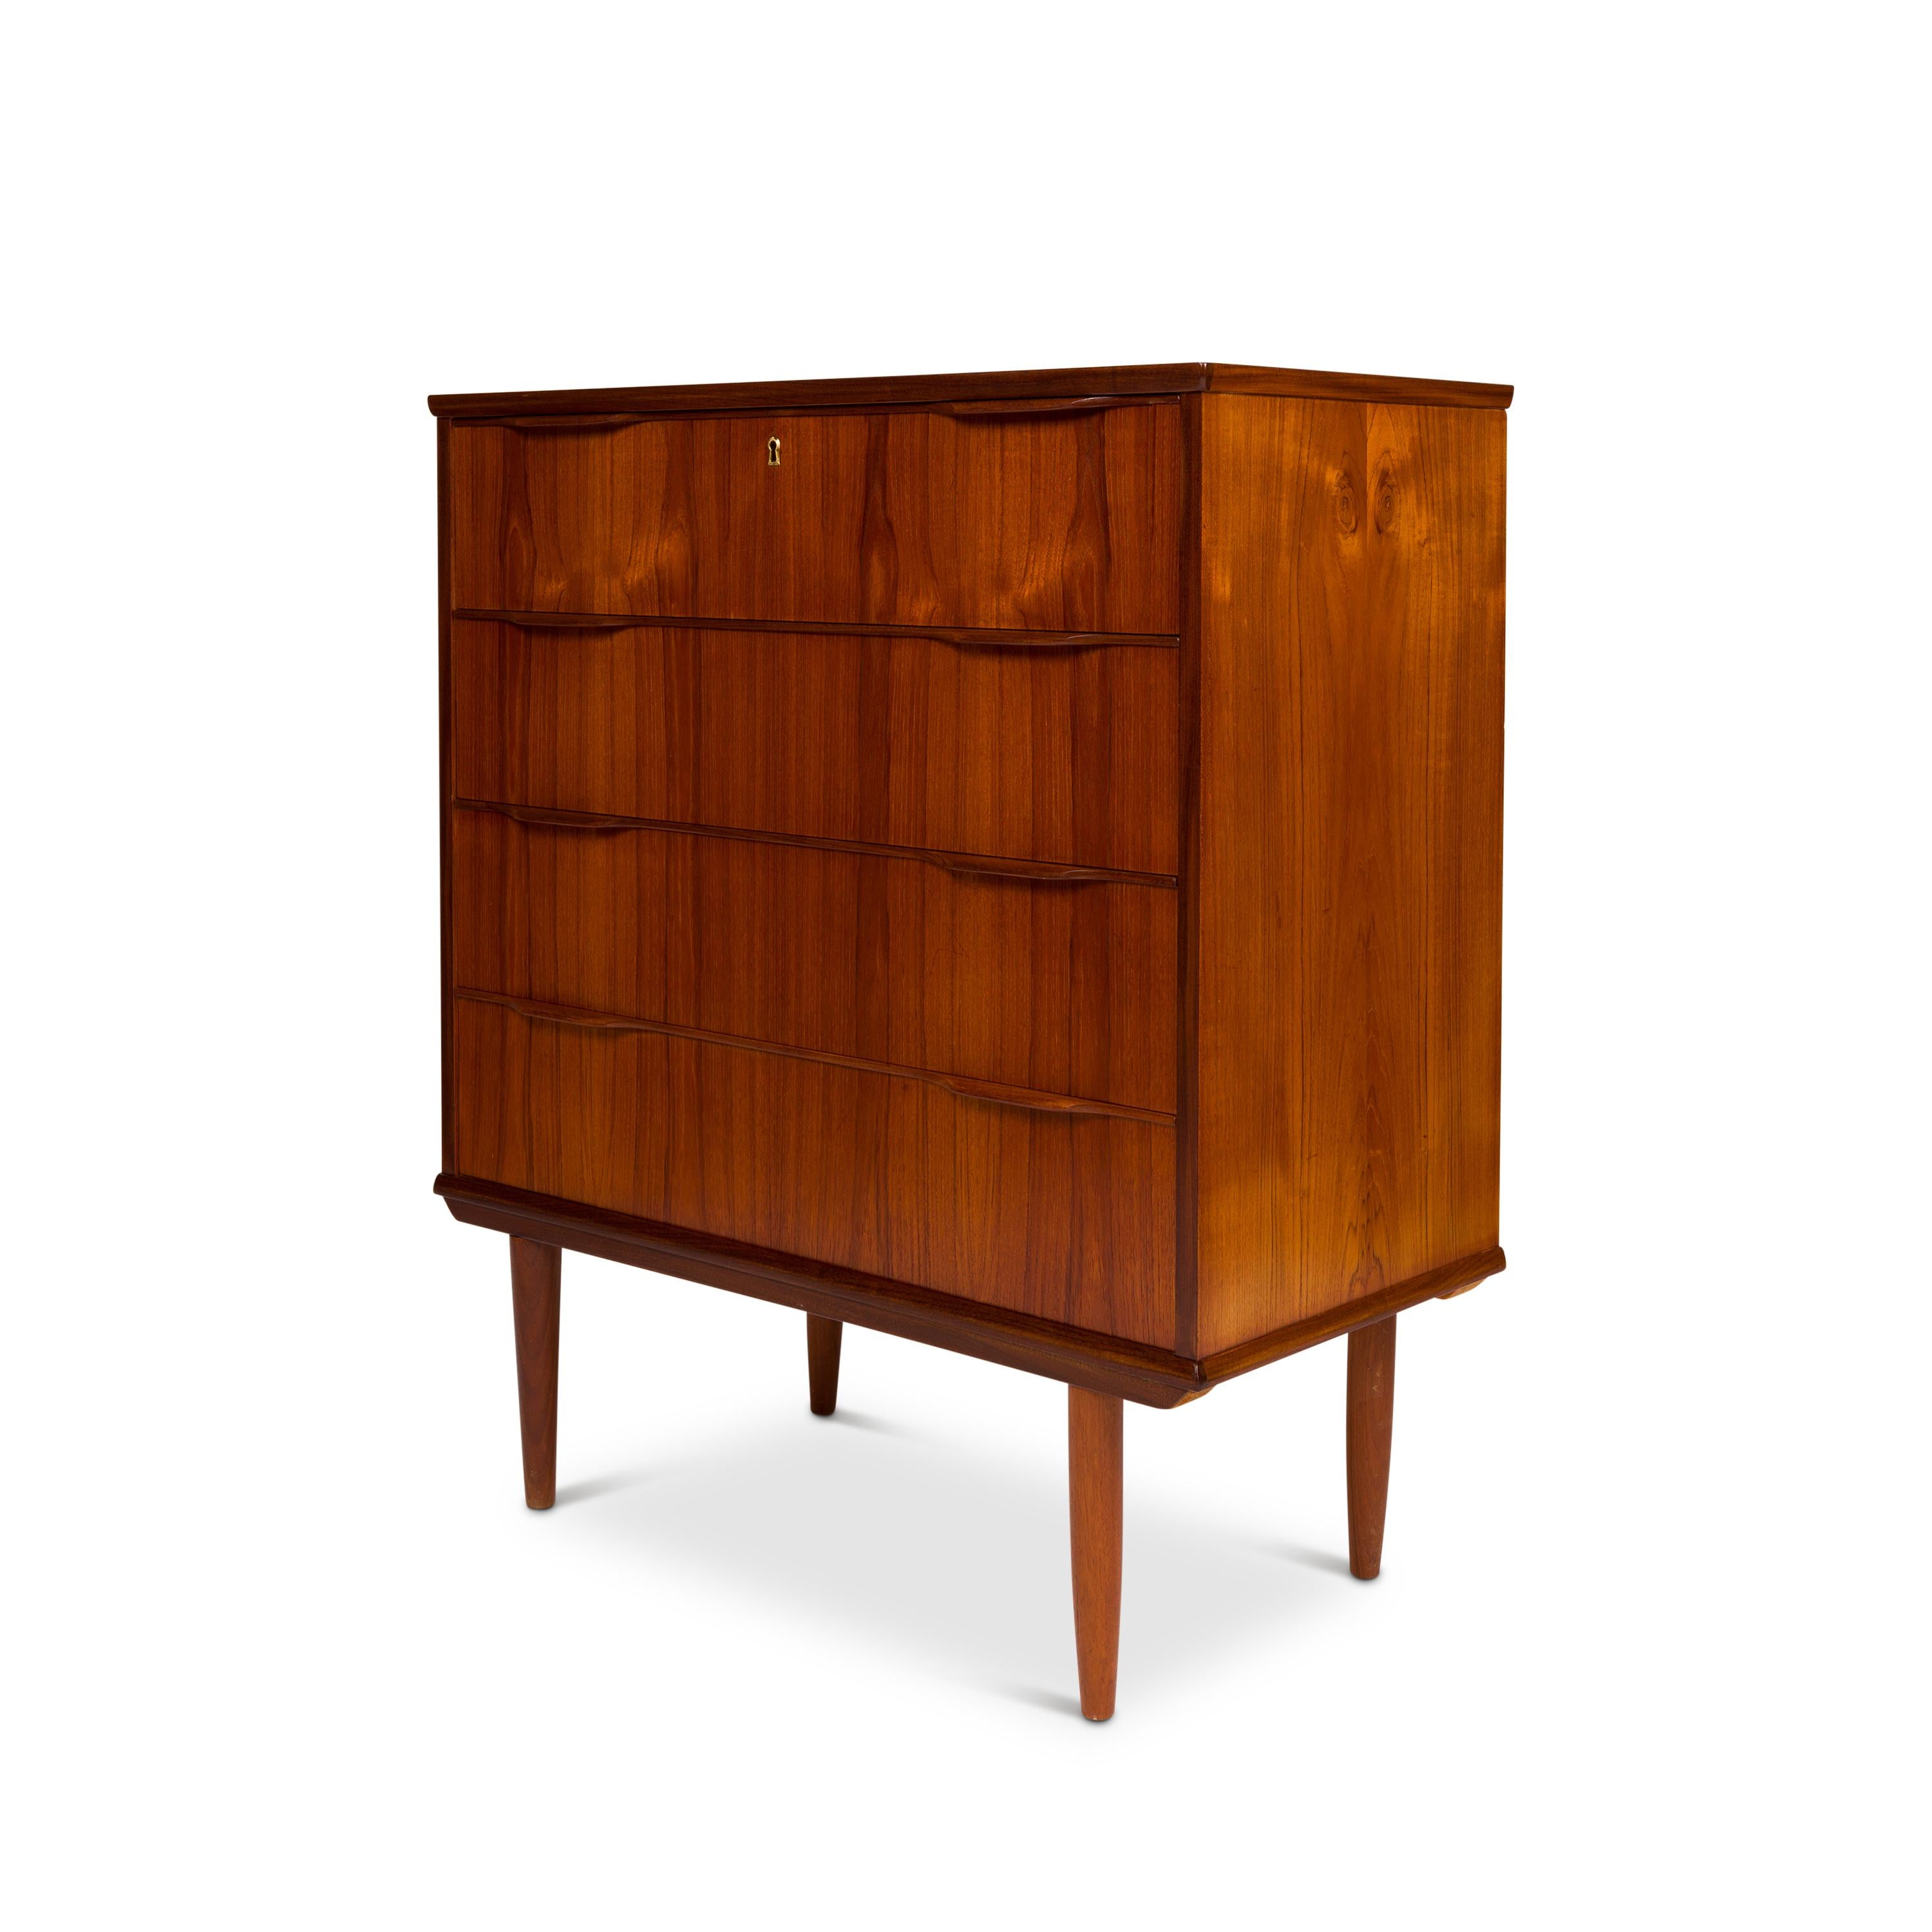 This vintage mid-century modern Danish chest of drawers embodies the essence of Mid-Century design. Its four drawers, adorned with sculptured wooden handles and seamless dovetail joins, effortlessly combine functionality with elegance. The natural